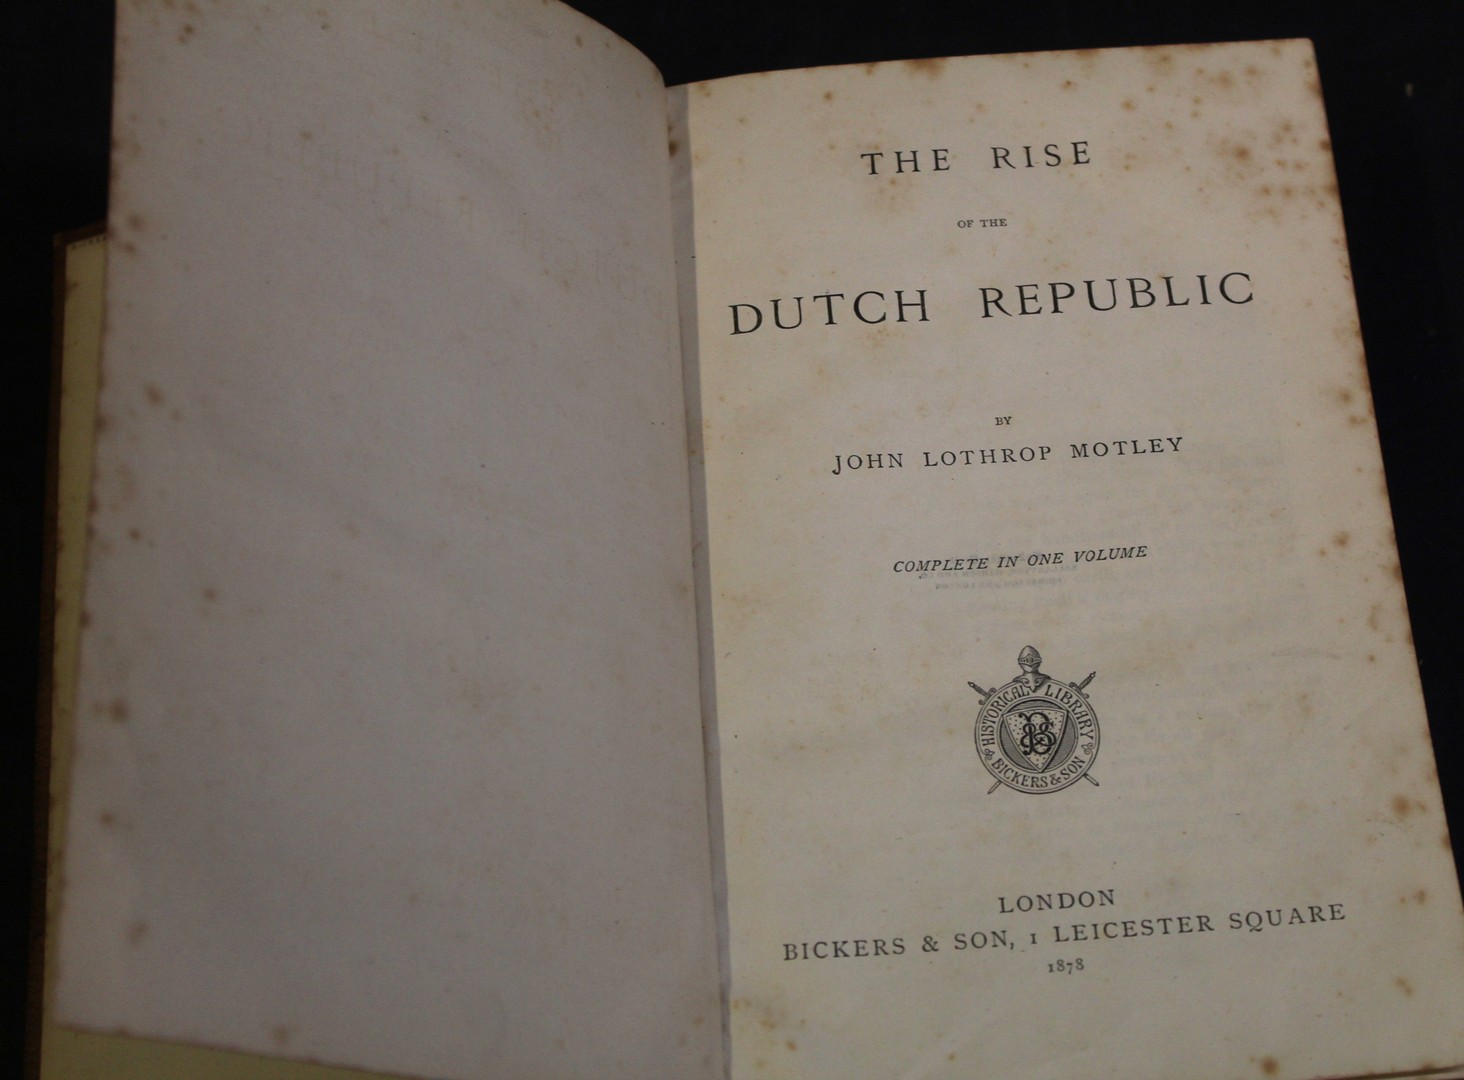 JOHN LOTHROP MOTLEY: THE RISE OF THE DUTCH REPUBLIC, London, Bickers, 1878, "Complete in one